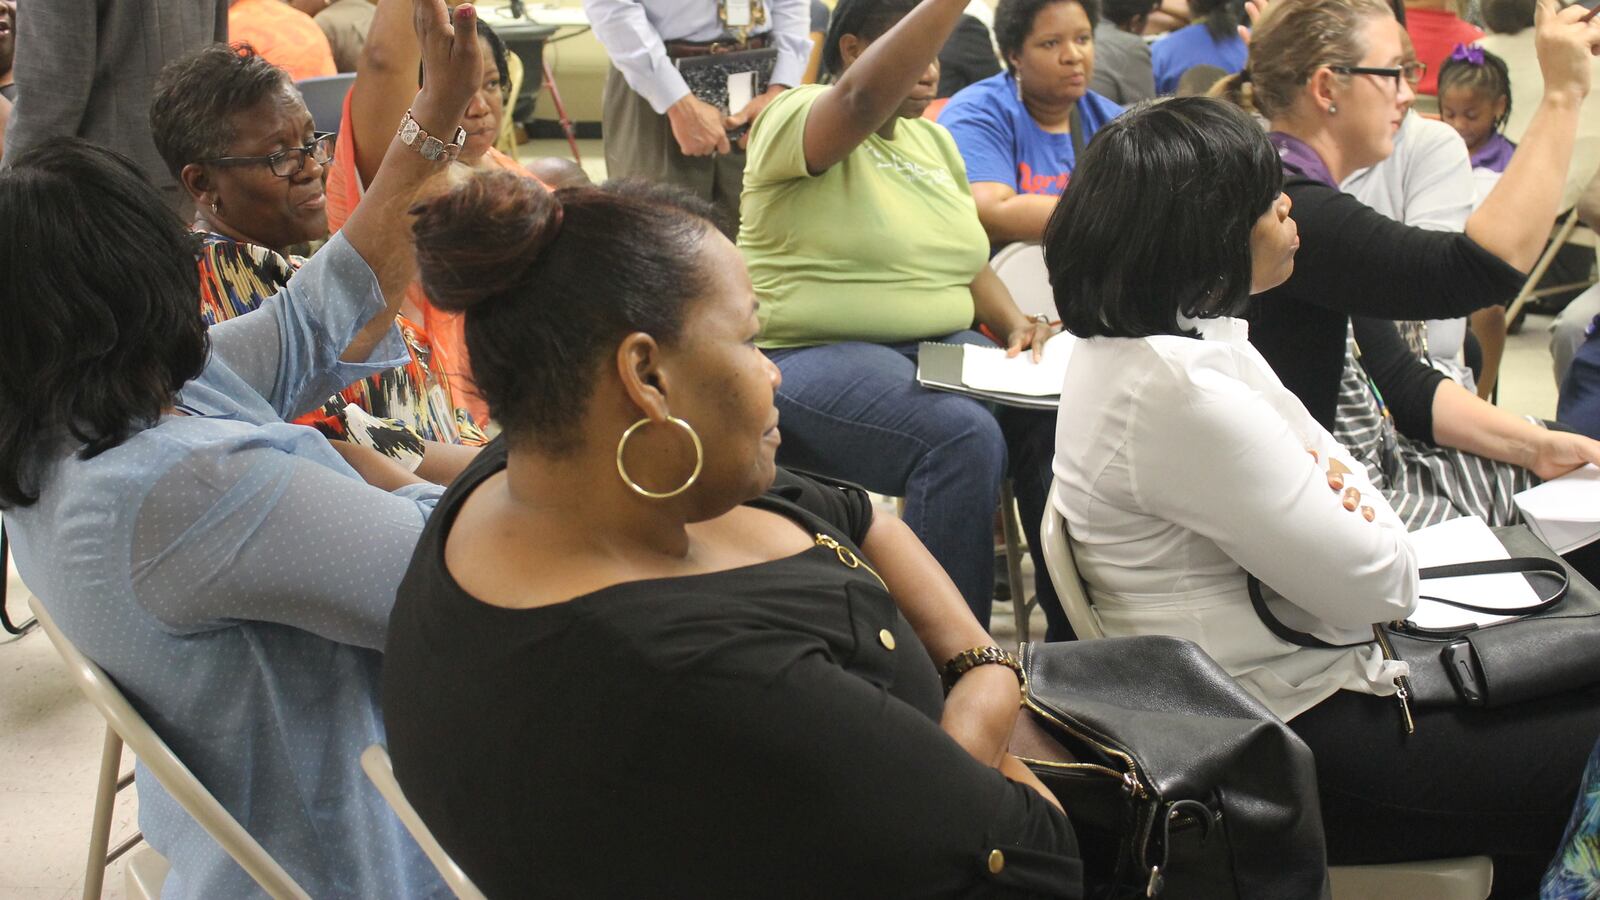 Teachers, parents and other education stakeholders offer input during a community meeting in Frayser about the future of Shelby County Schools.